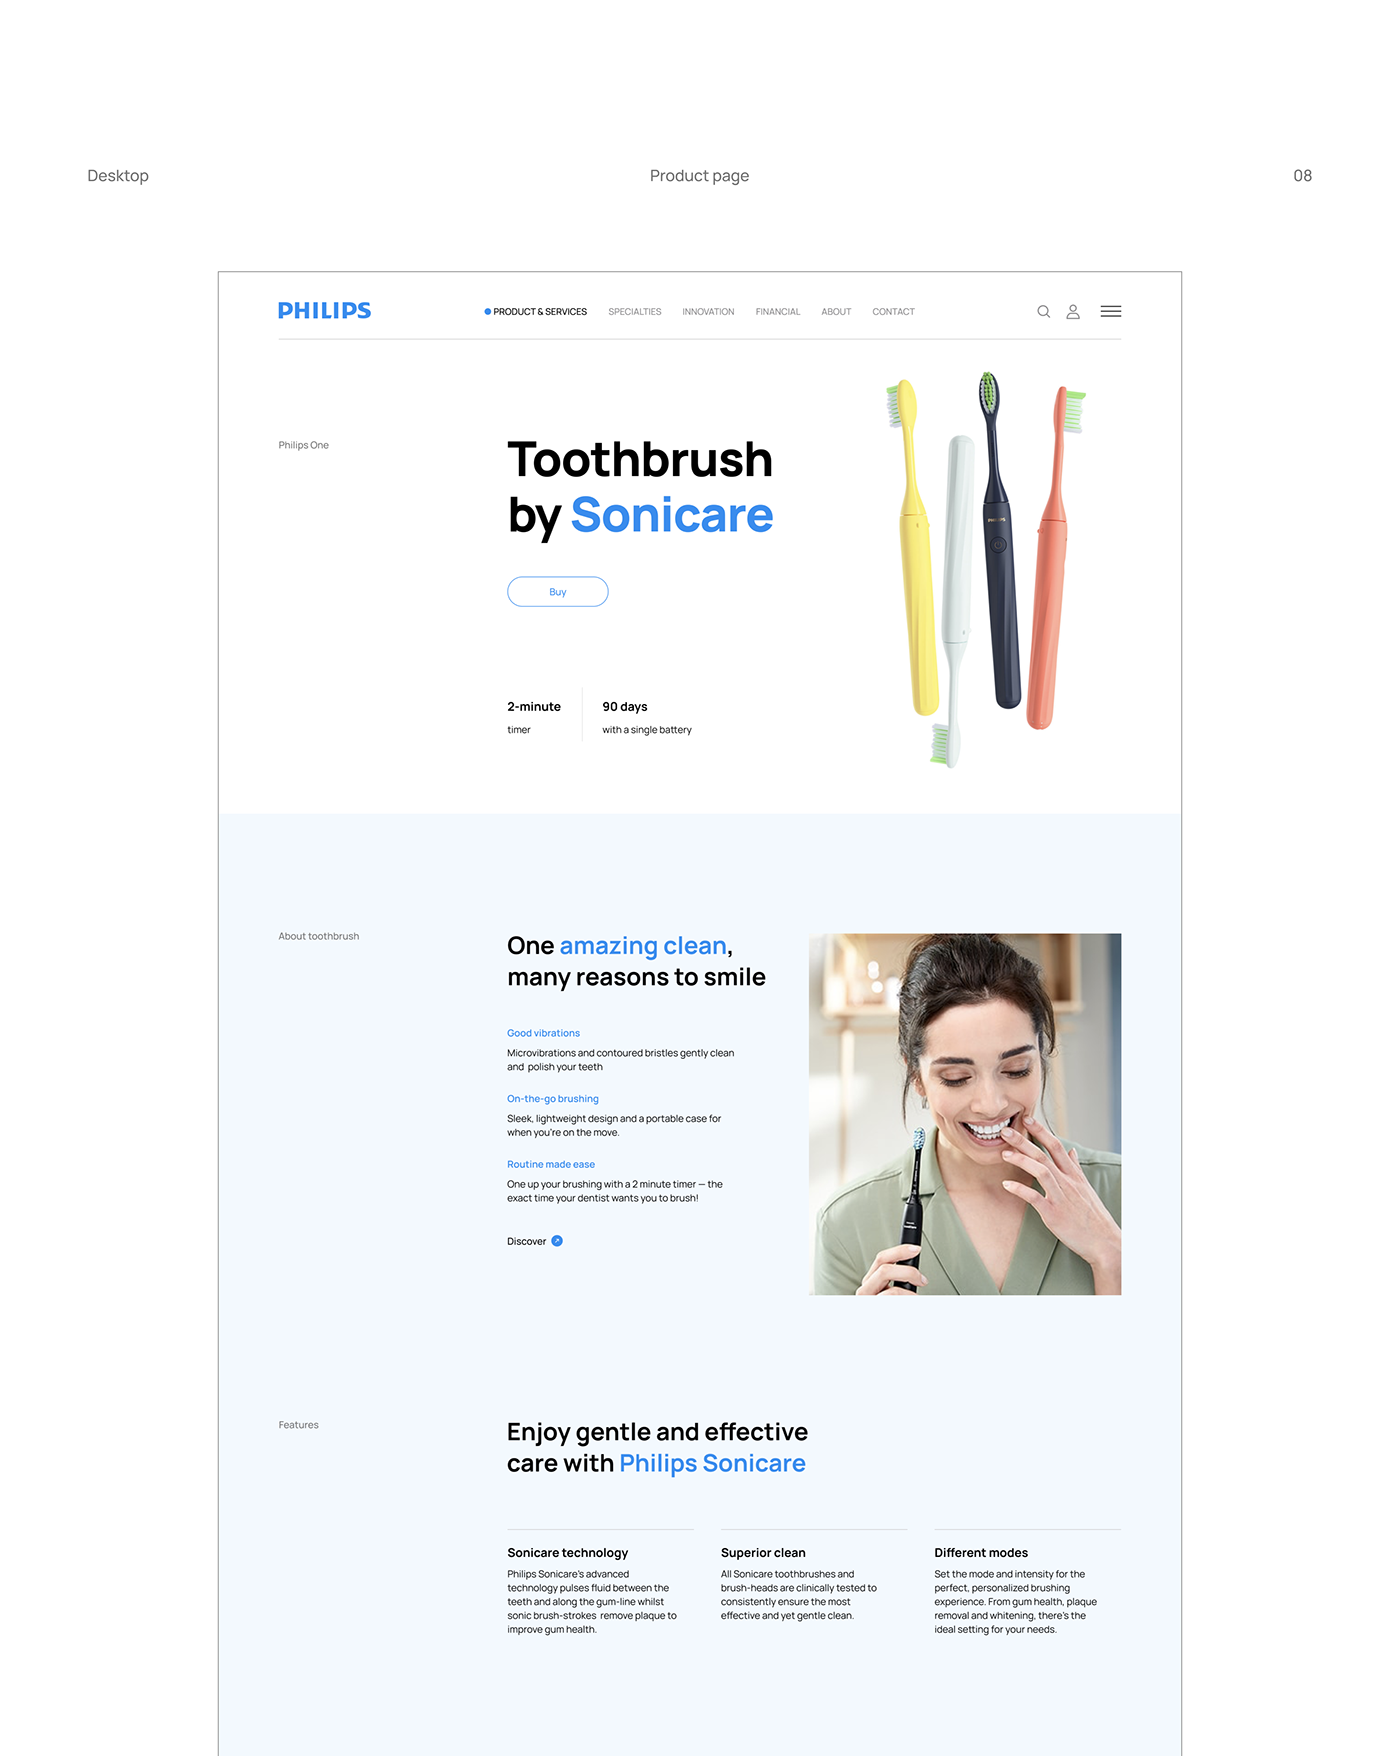 Health healthcare innovation redesign Technology company concept Minimalism site UI/UX